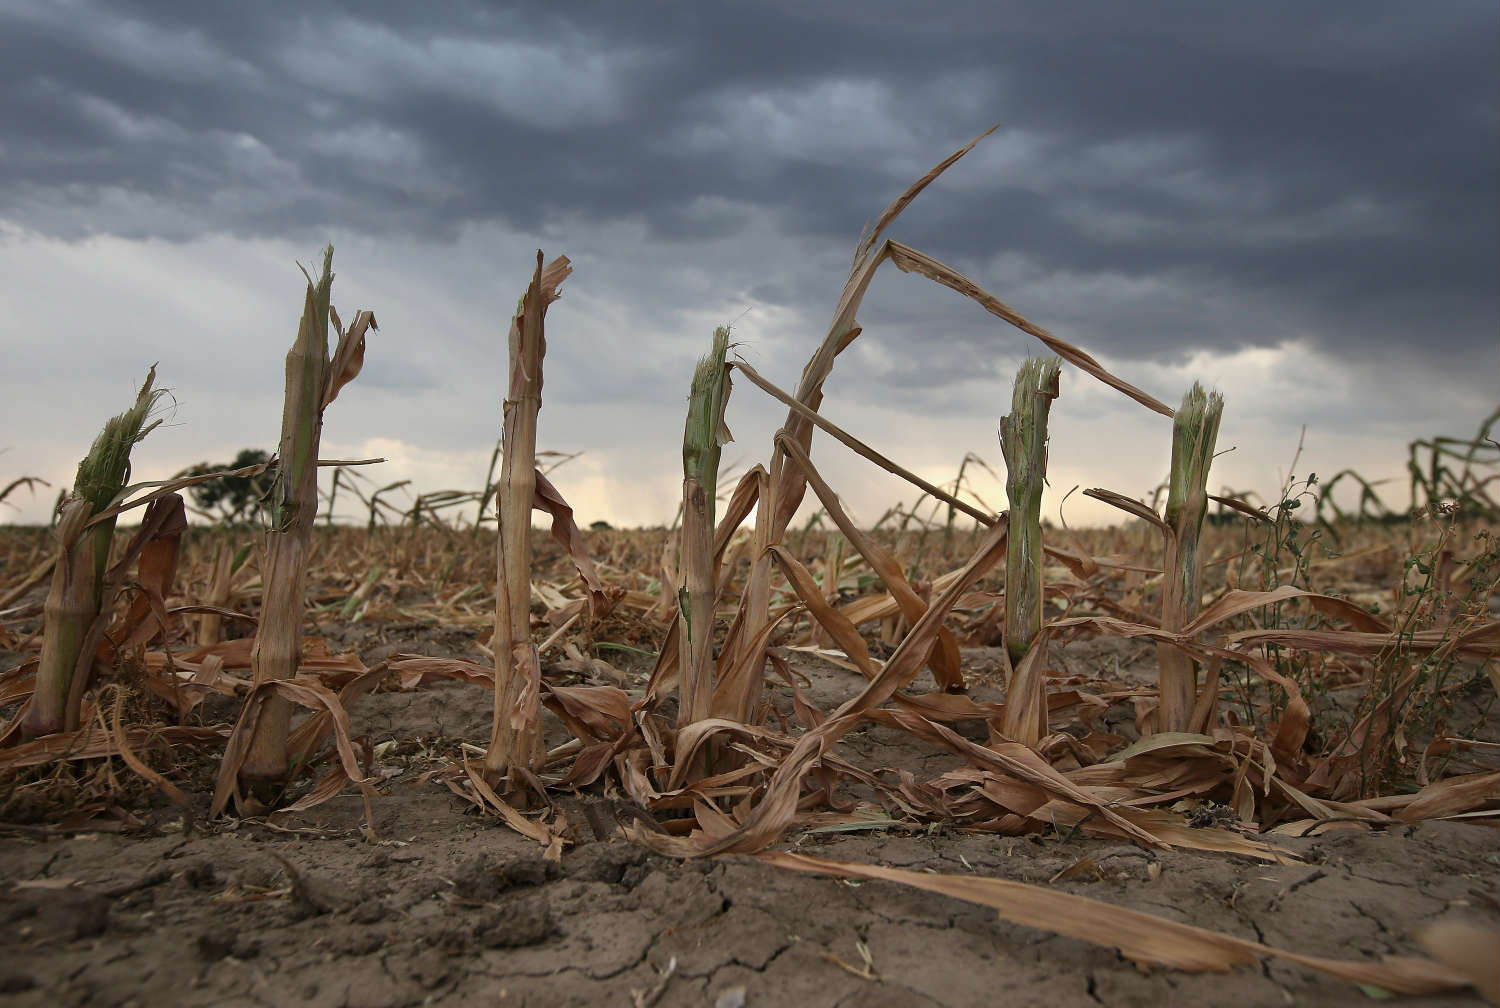 A warmer climate could reduce the yield of staple crops like maize (Photo by John Moore/Getty Images)